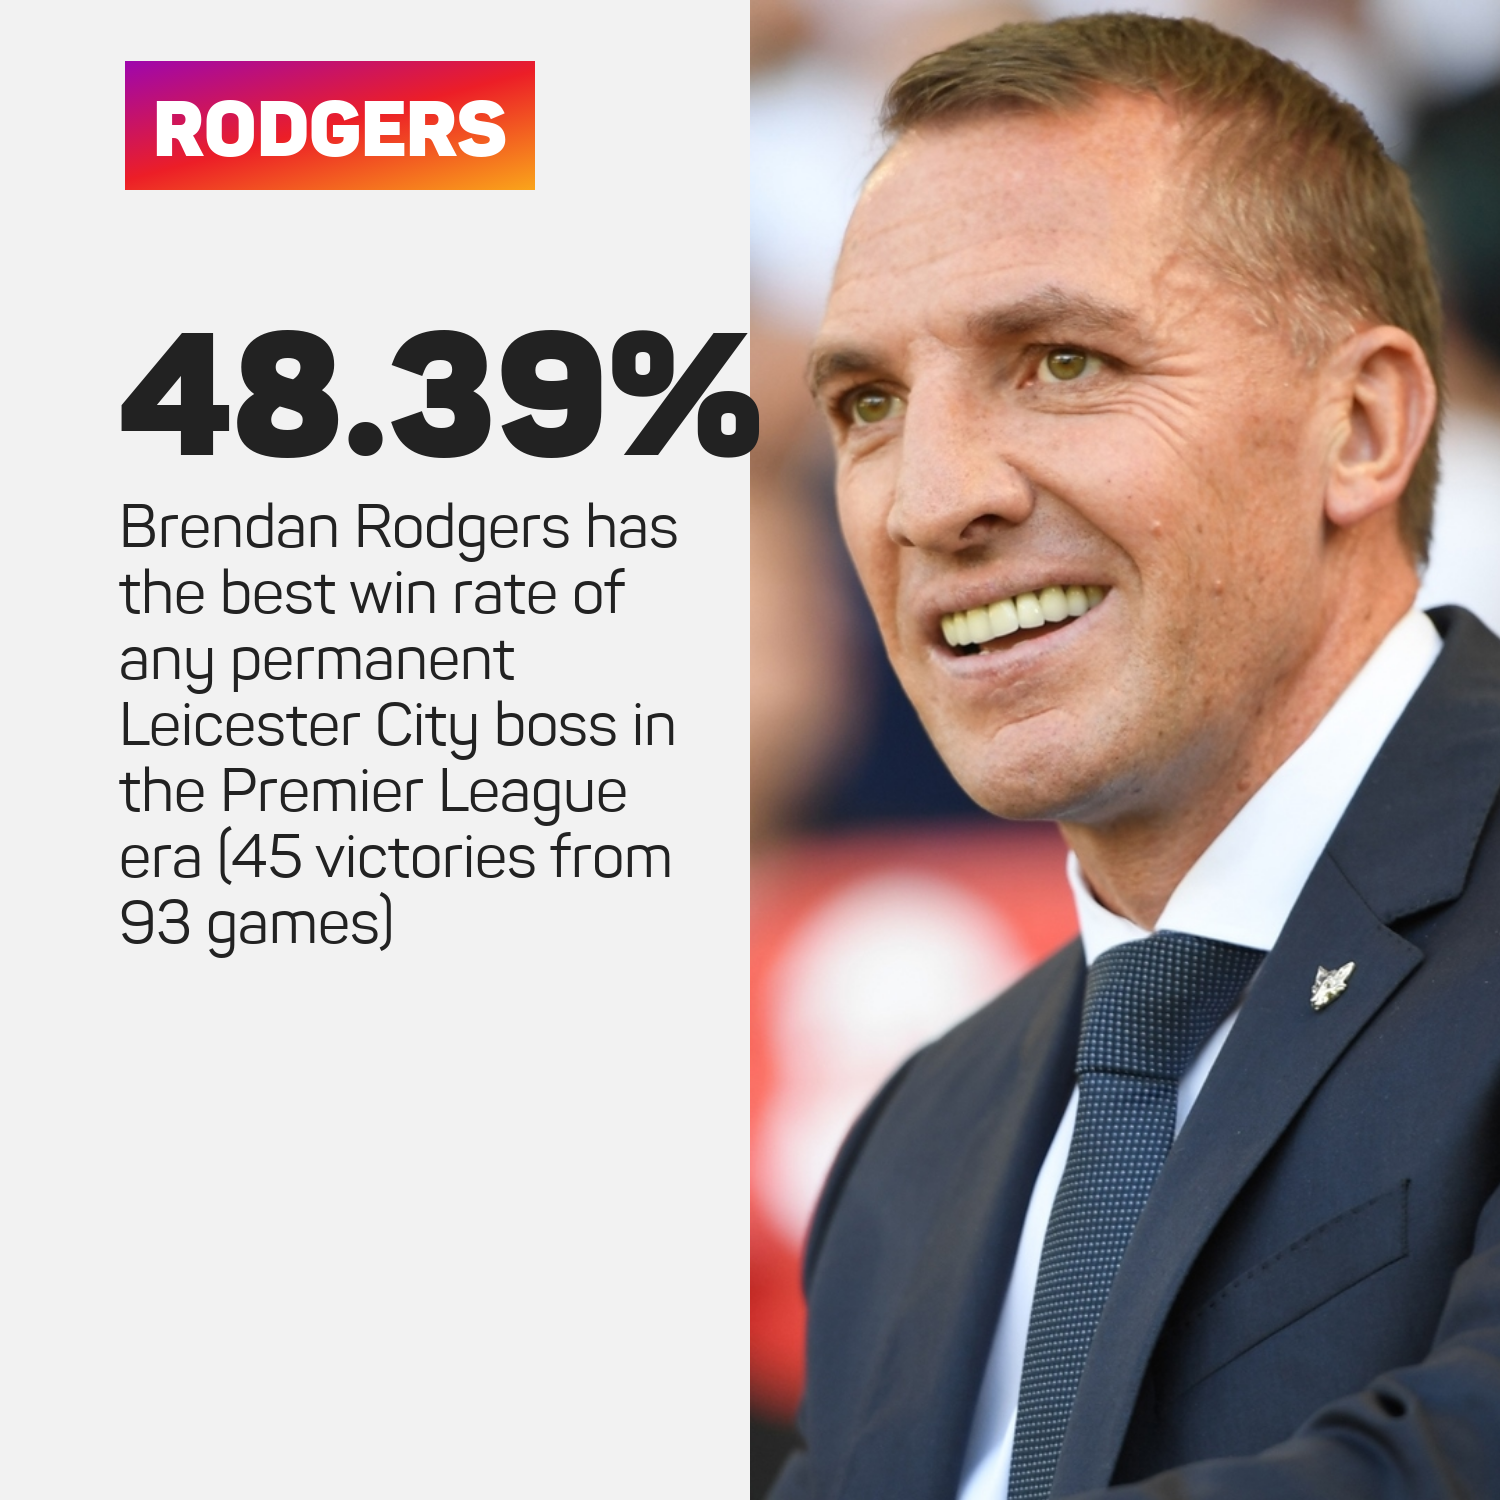 Brendan Rodgers win rate at Leicester City